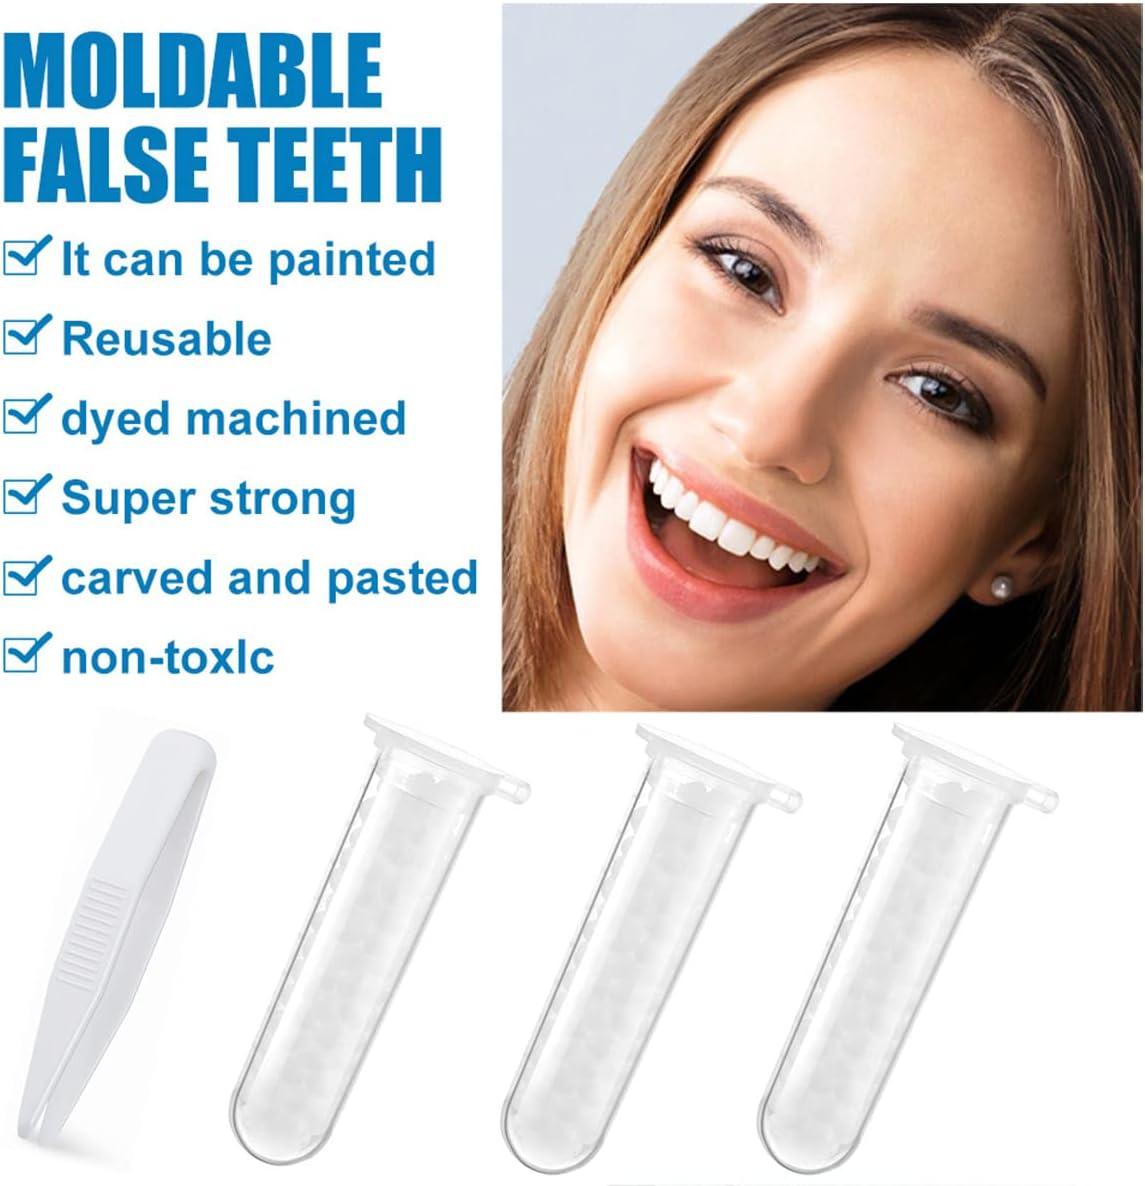 Temporary Tooth Replacement Beads